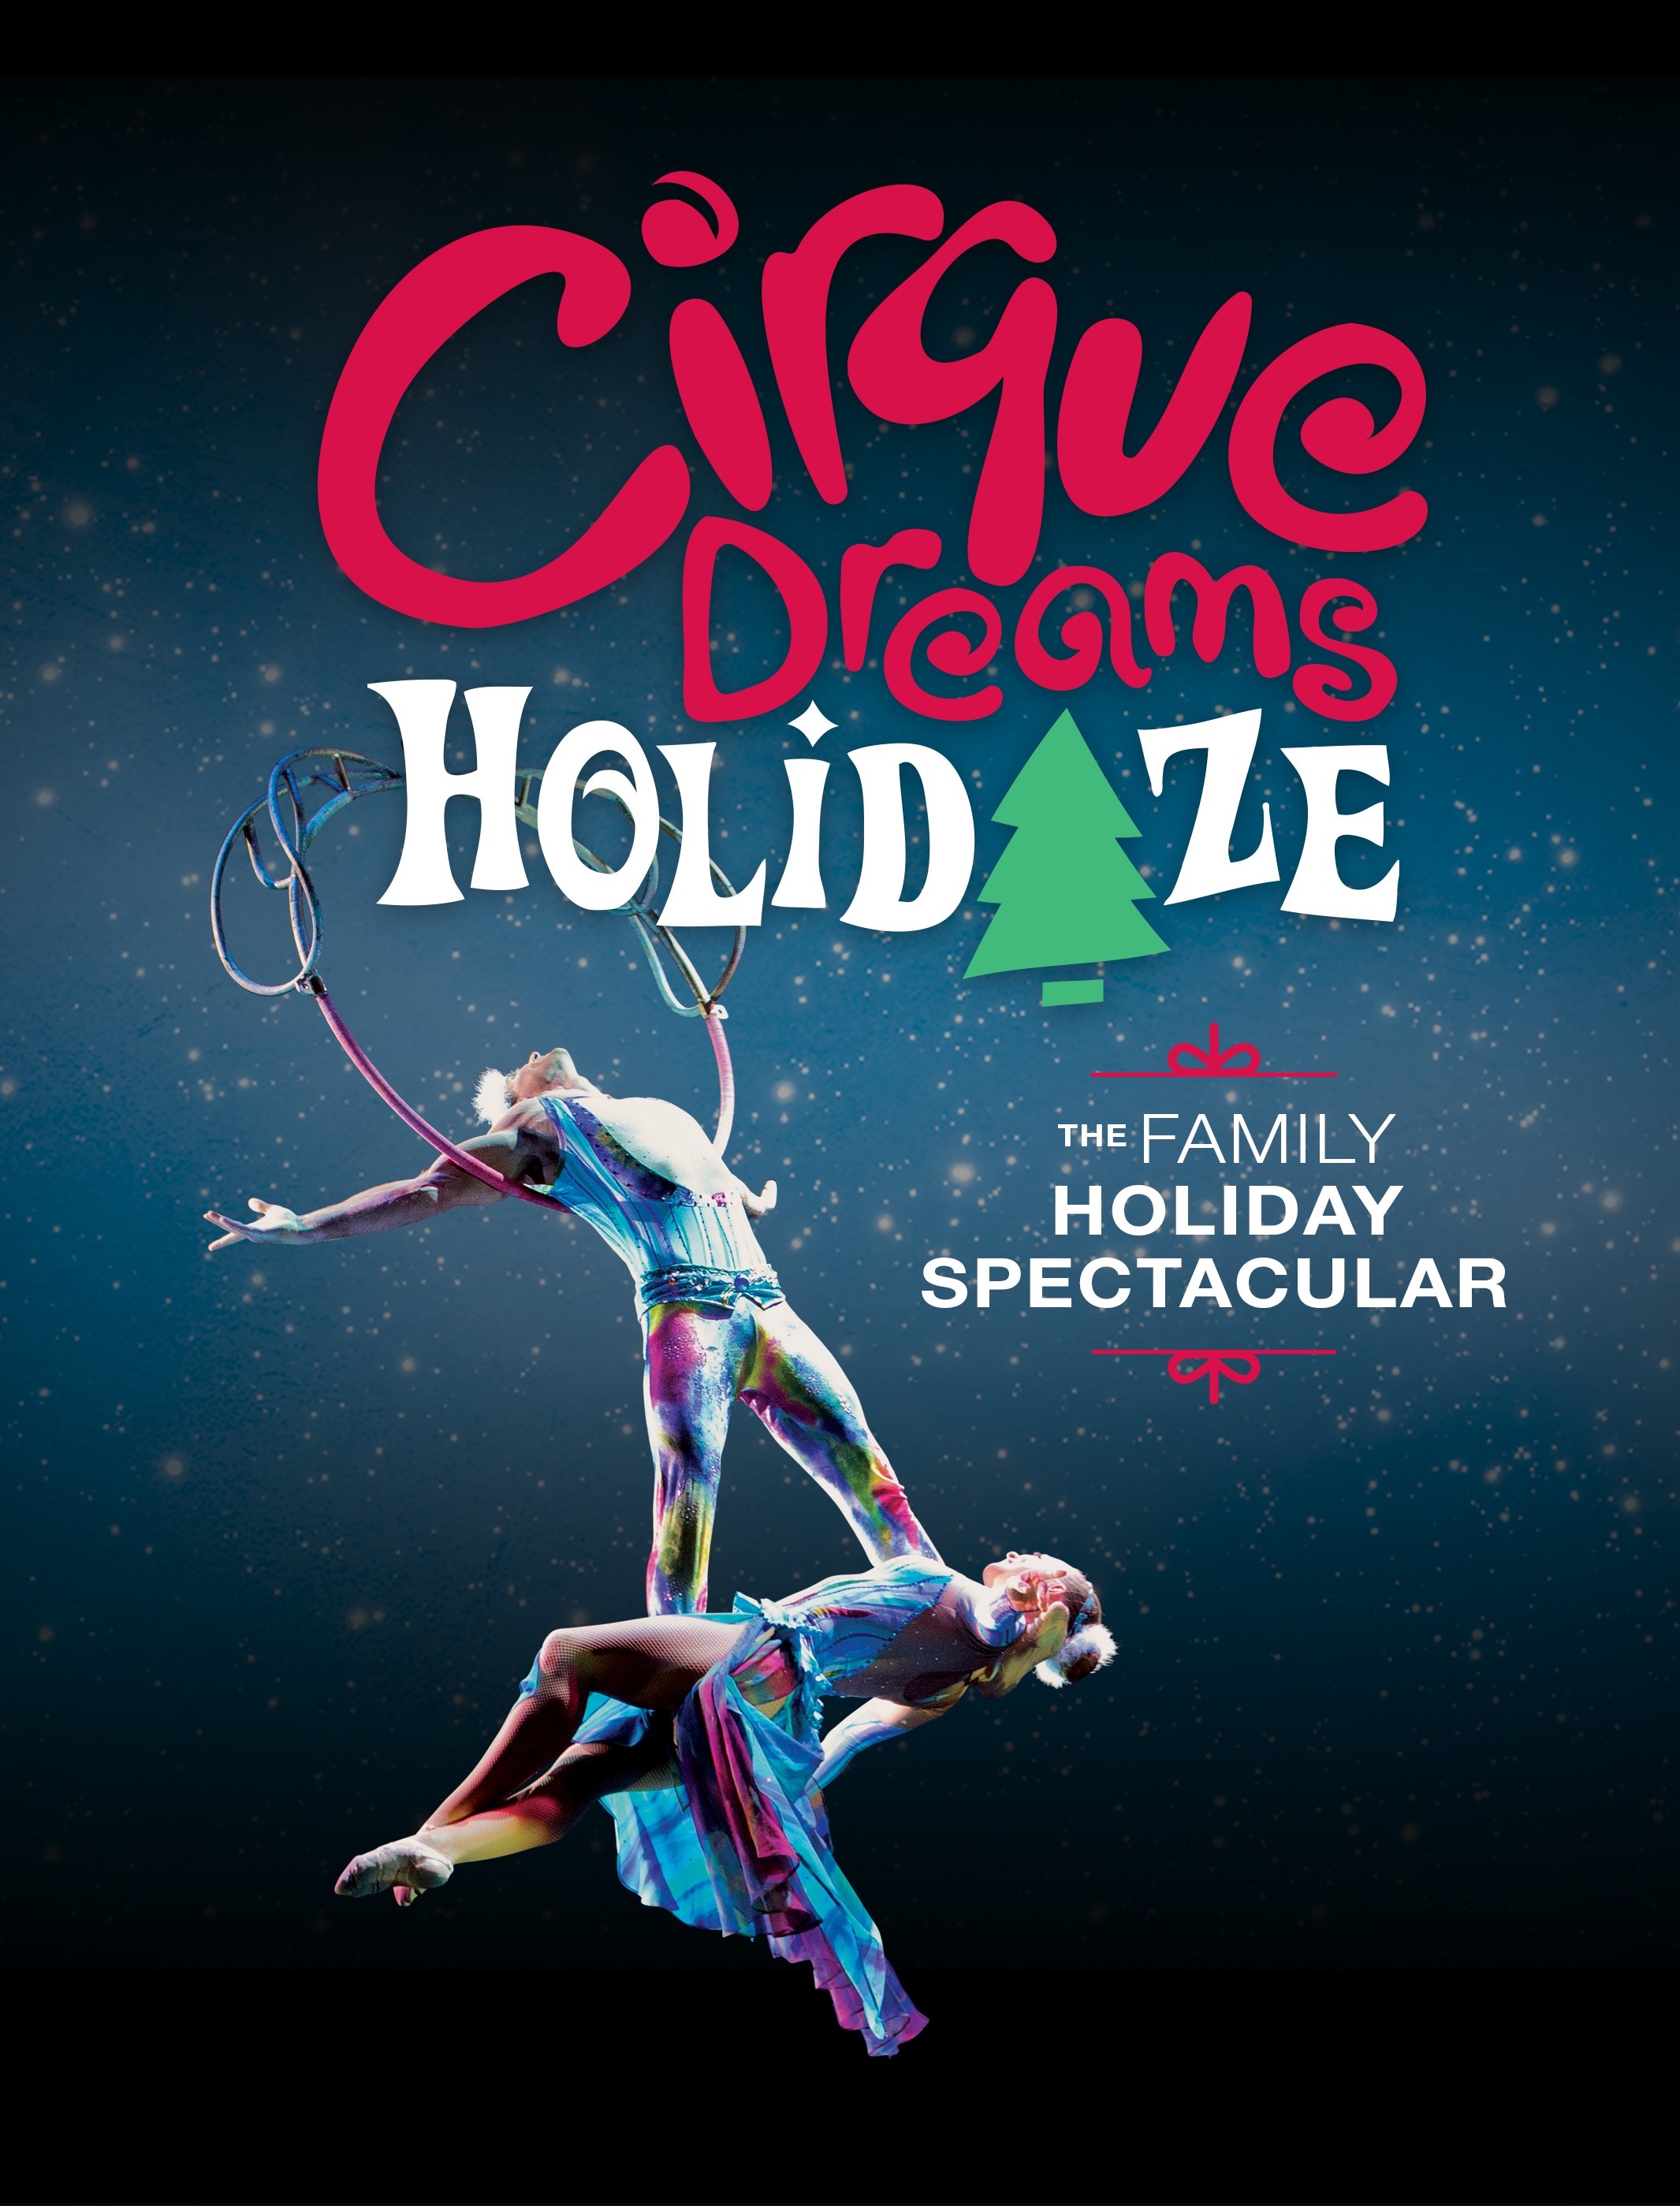 Cirque Musica pays playful homage to holidays - Lively Times